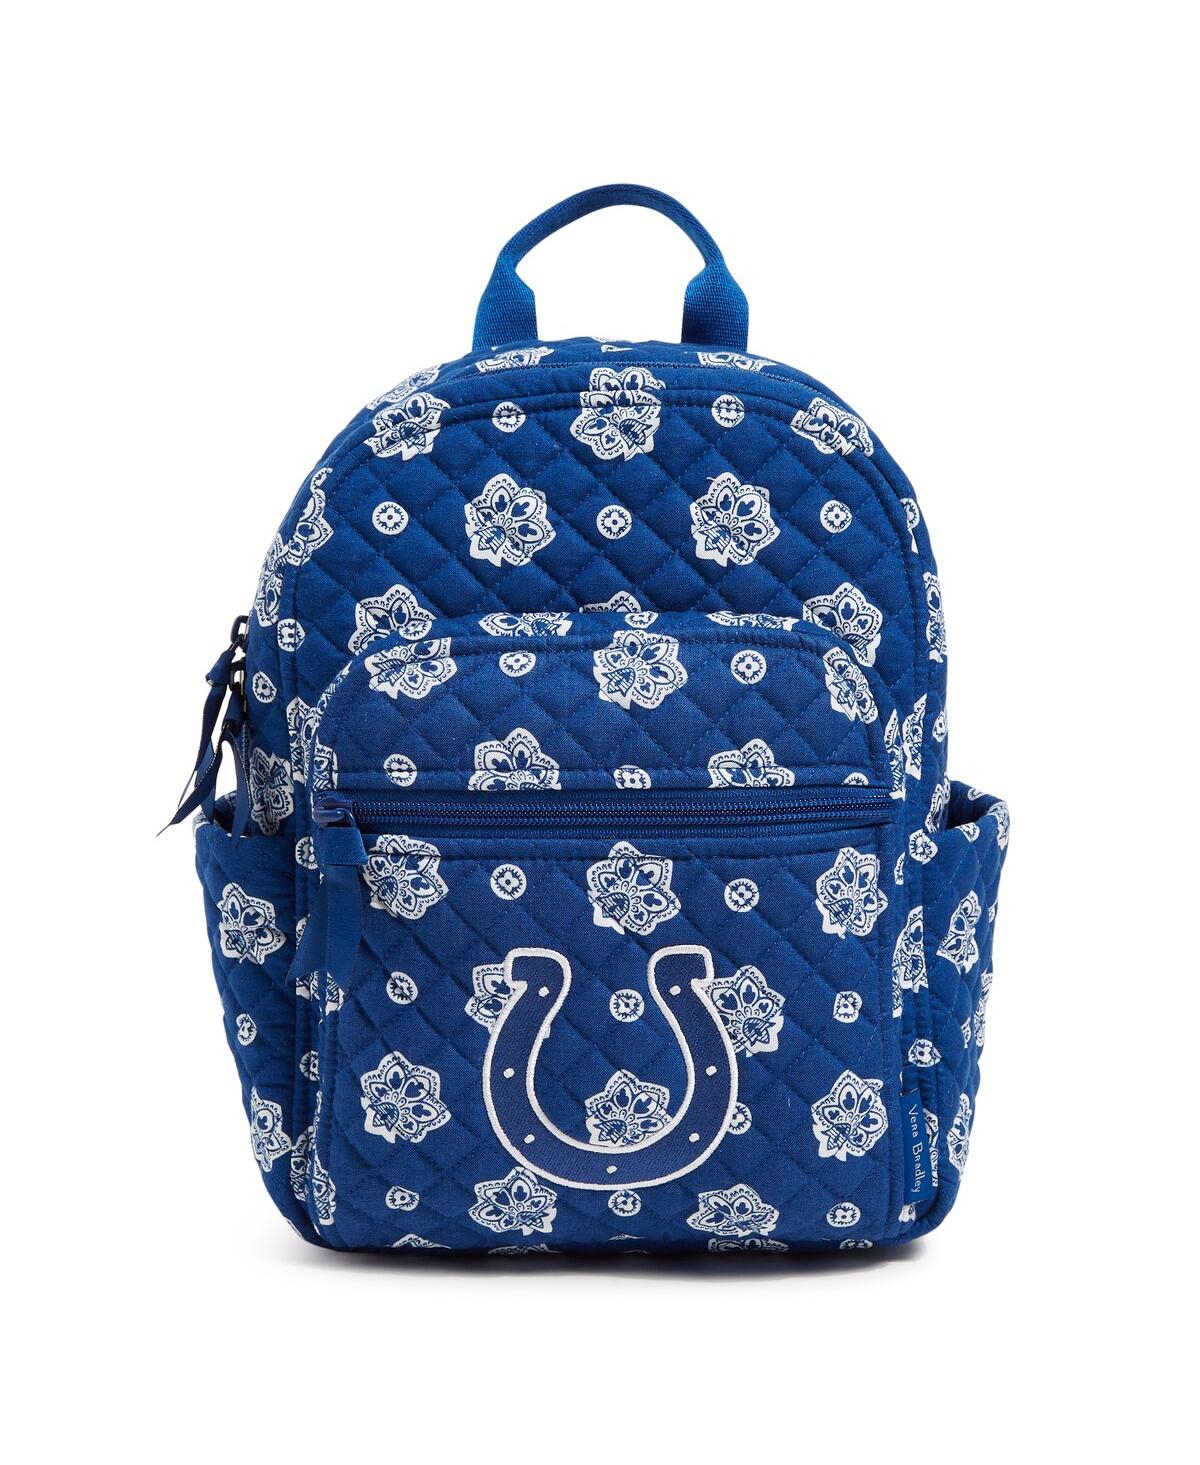 Men's and Women's Vera Bradley Indianapolis Colts Small Backpack - Blue